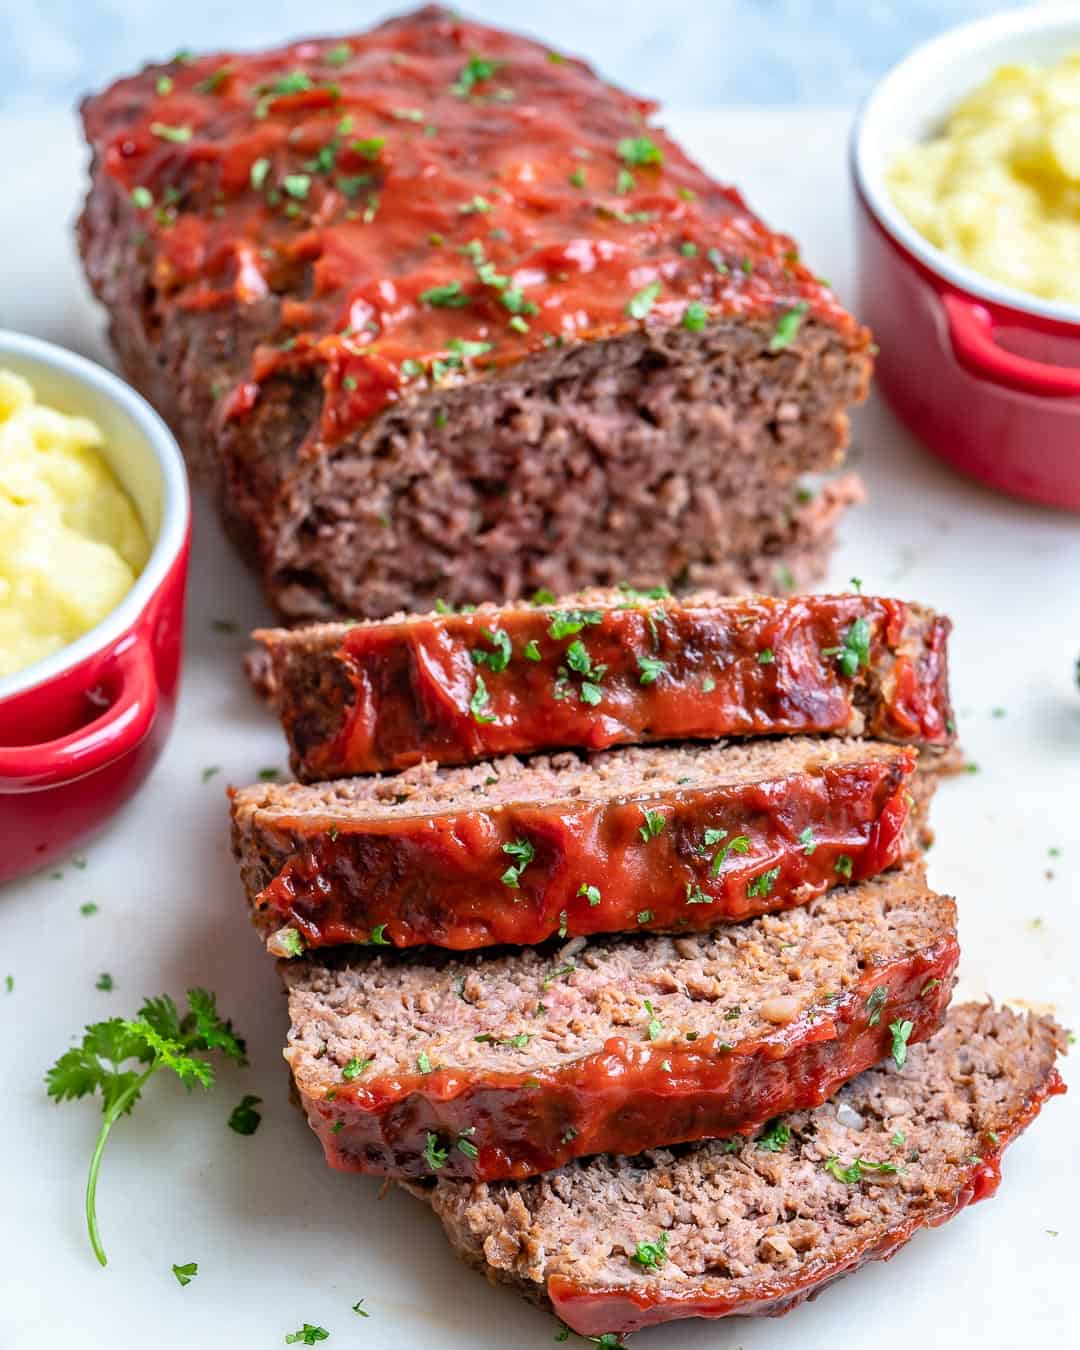 Easy Homemade Meatloaf Recipe | Healthy